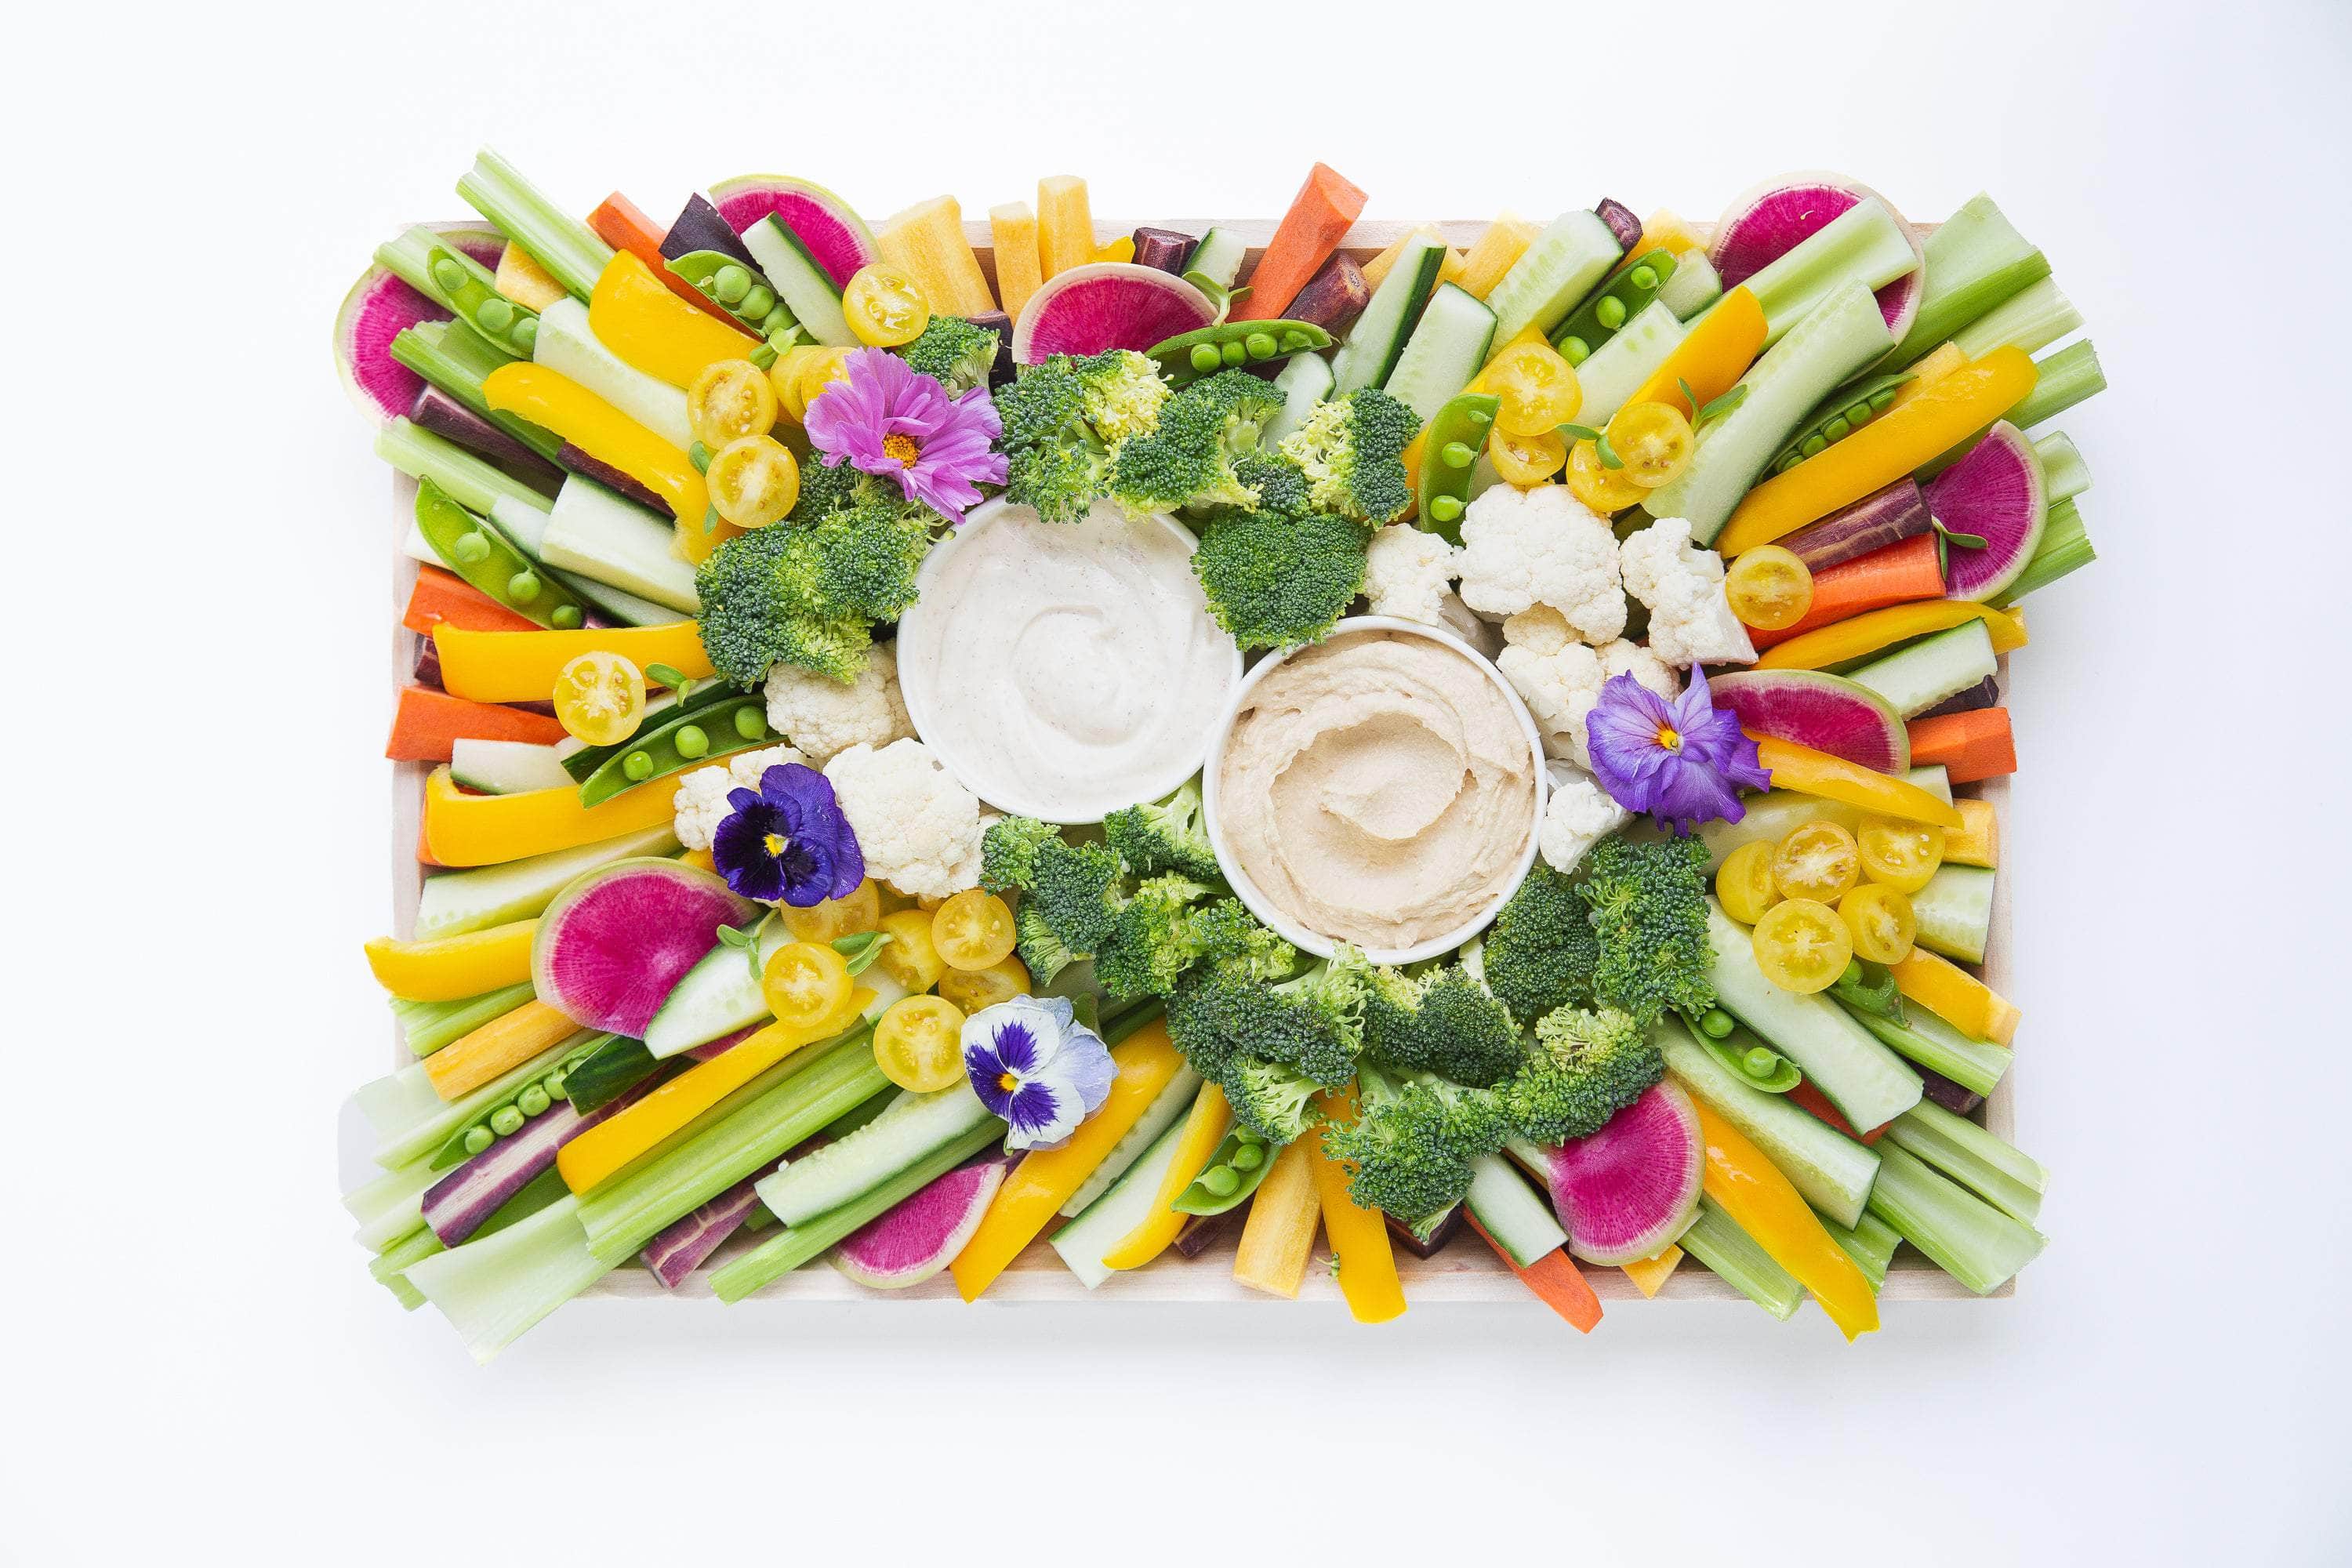 Best crudite platter large for delivery in Toronto Ontario